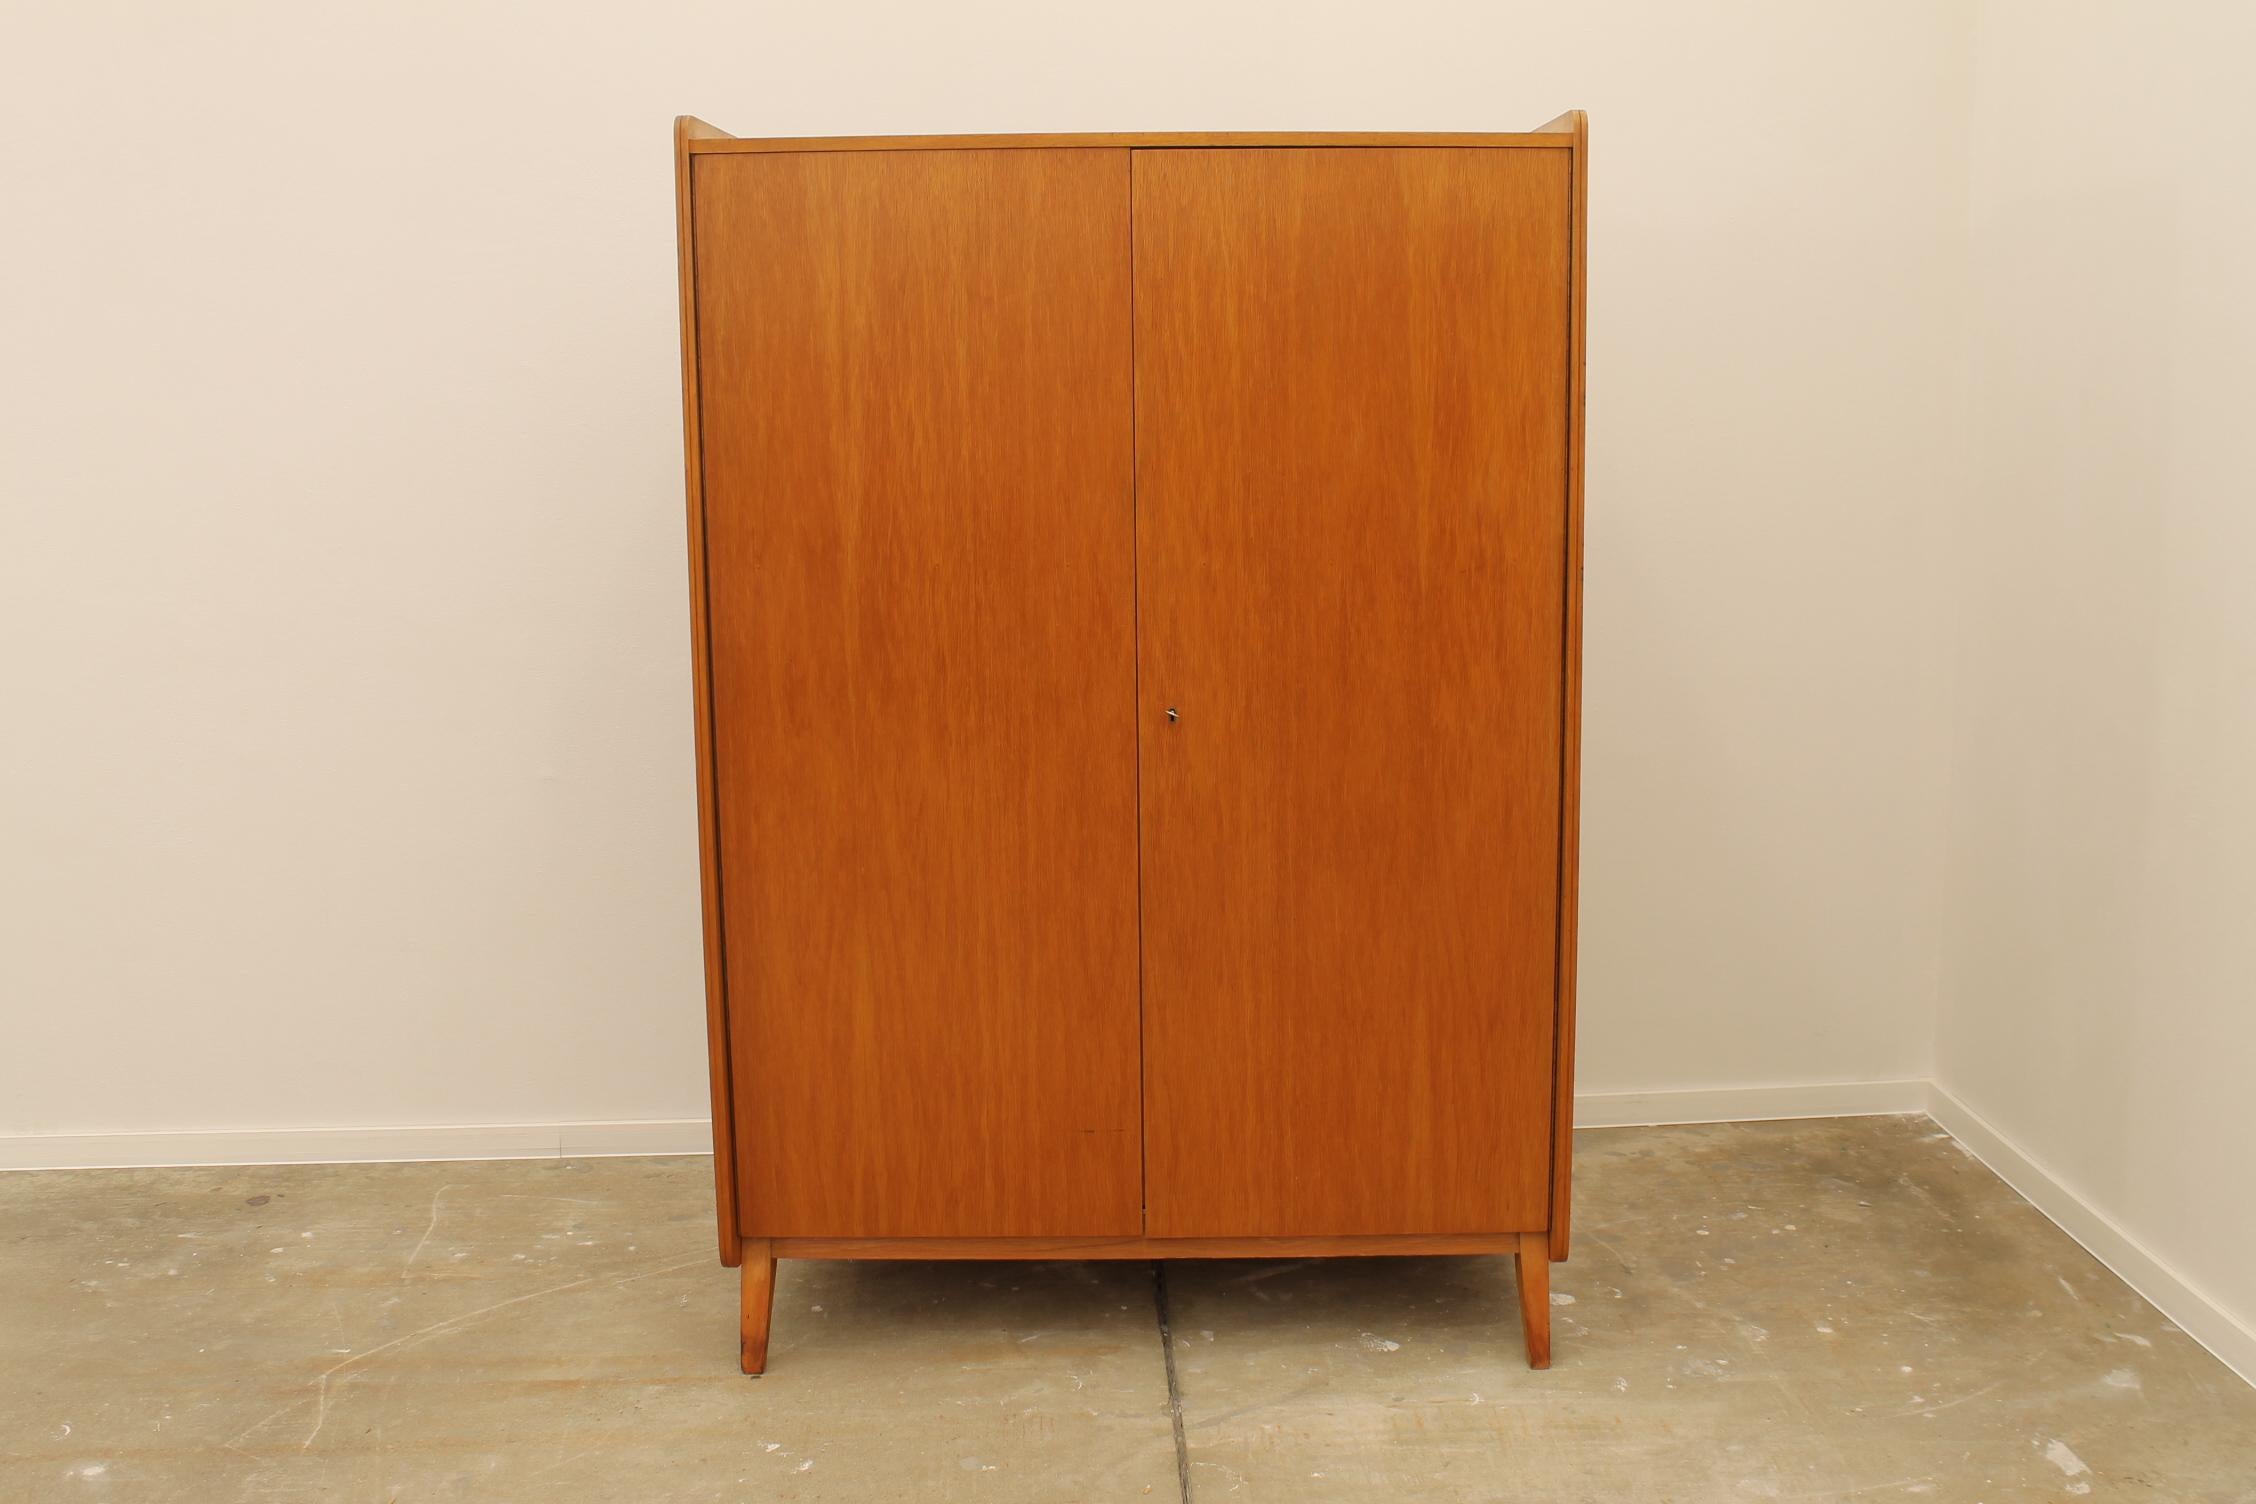 Vintage Czechoslovak modernist wardrobe designed by Frantisek Jirak for Tatra nabytok. Made in Czechoslovakia during the 1960s. It is made of beech wood and plywood. This item is in good vintage condition without visible damage, showing signs of age